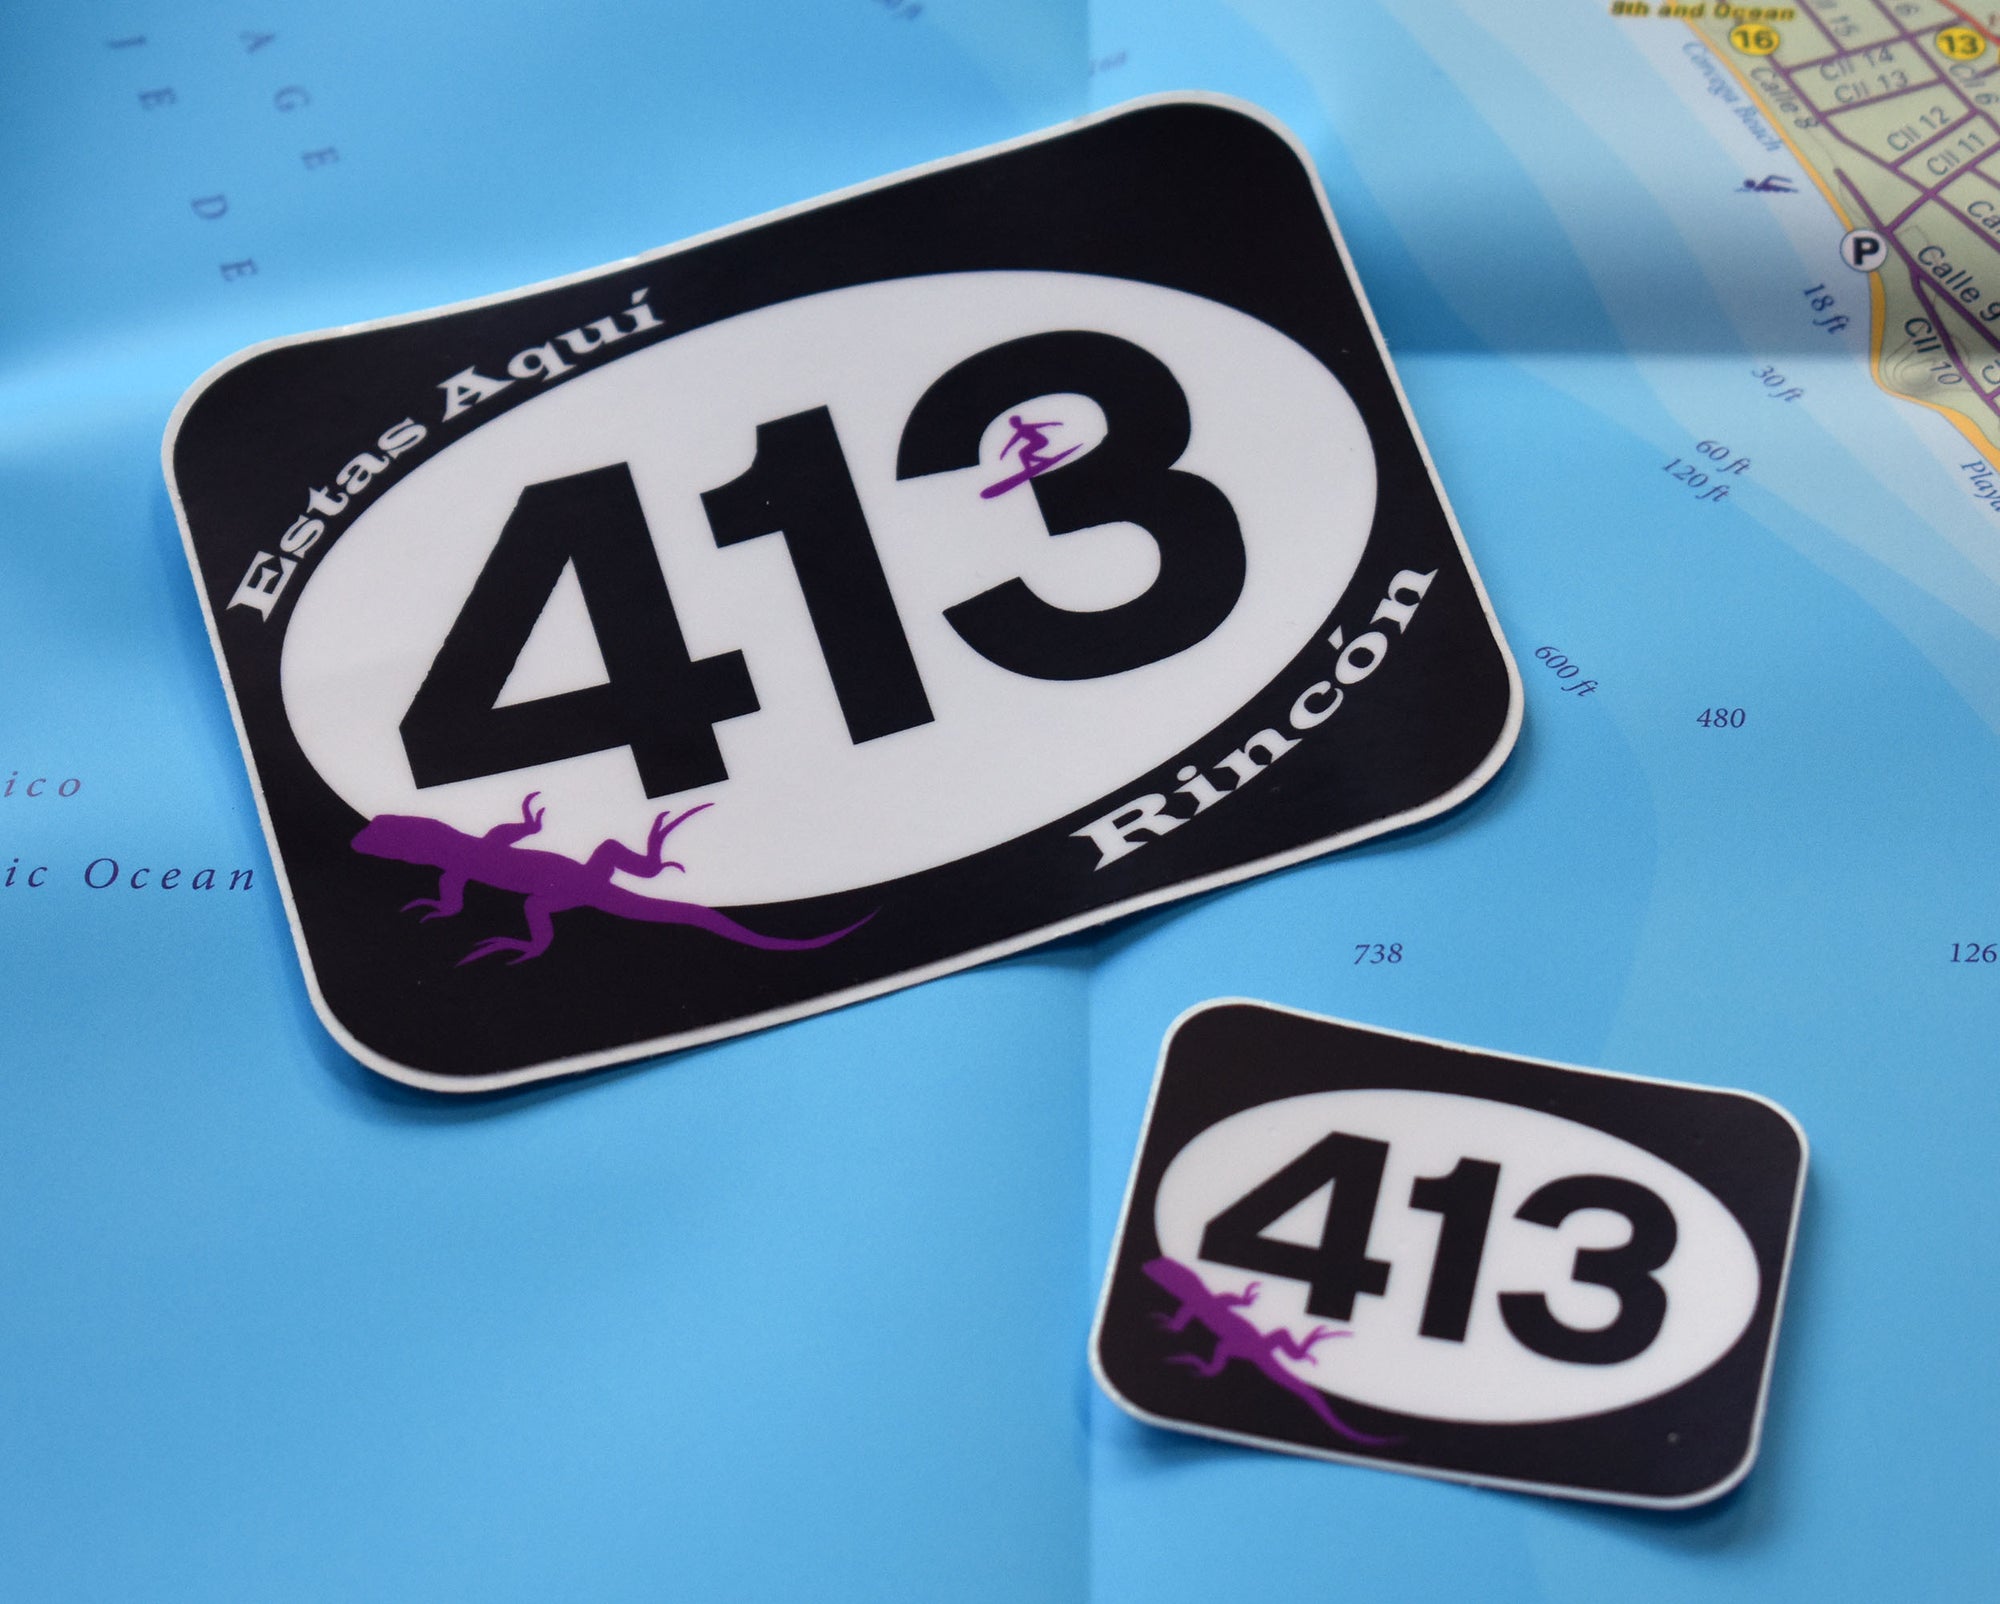 The 413 Lizard Stickers: a matched set